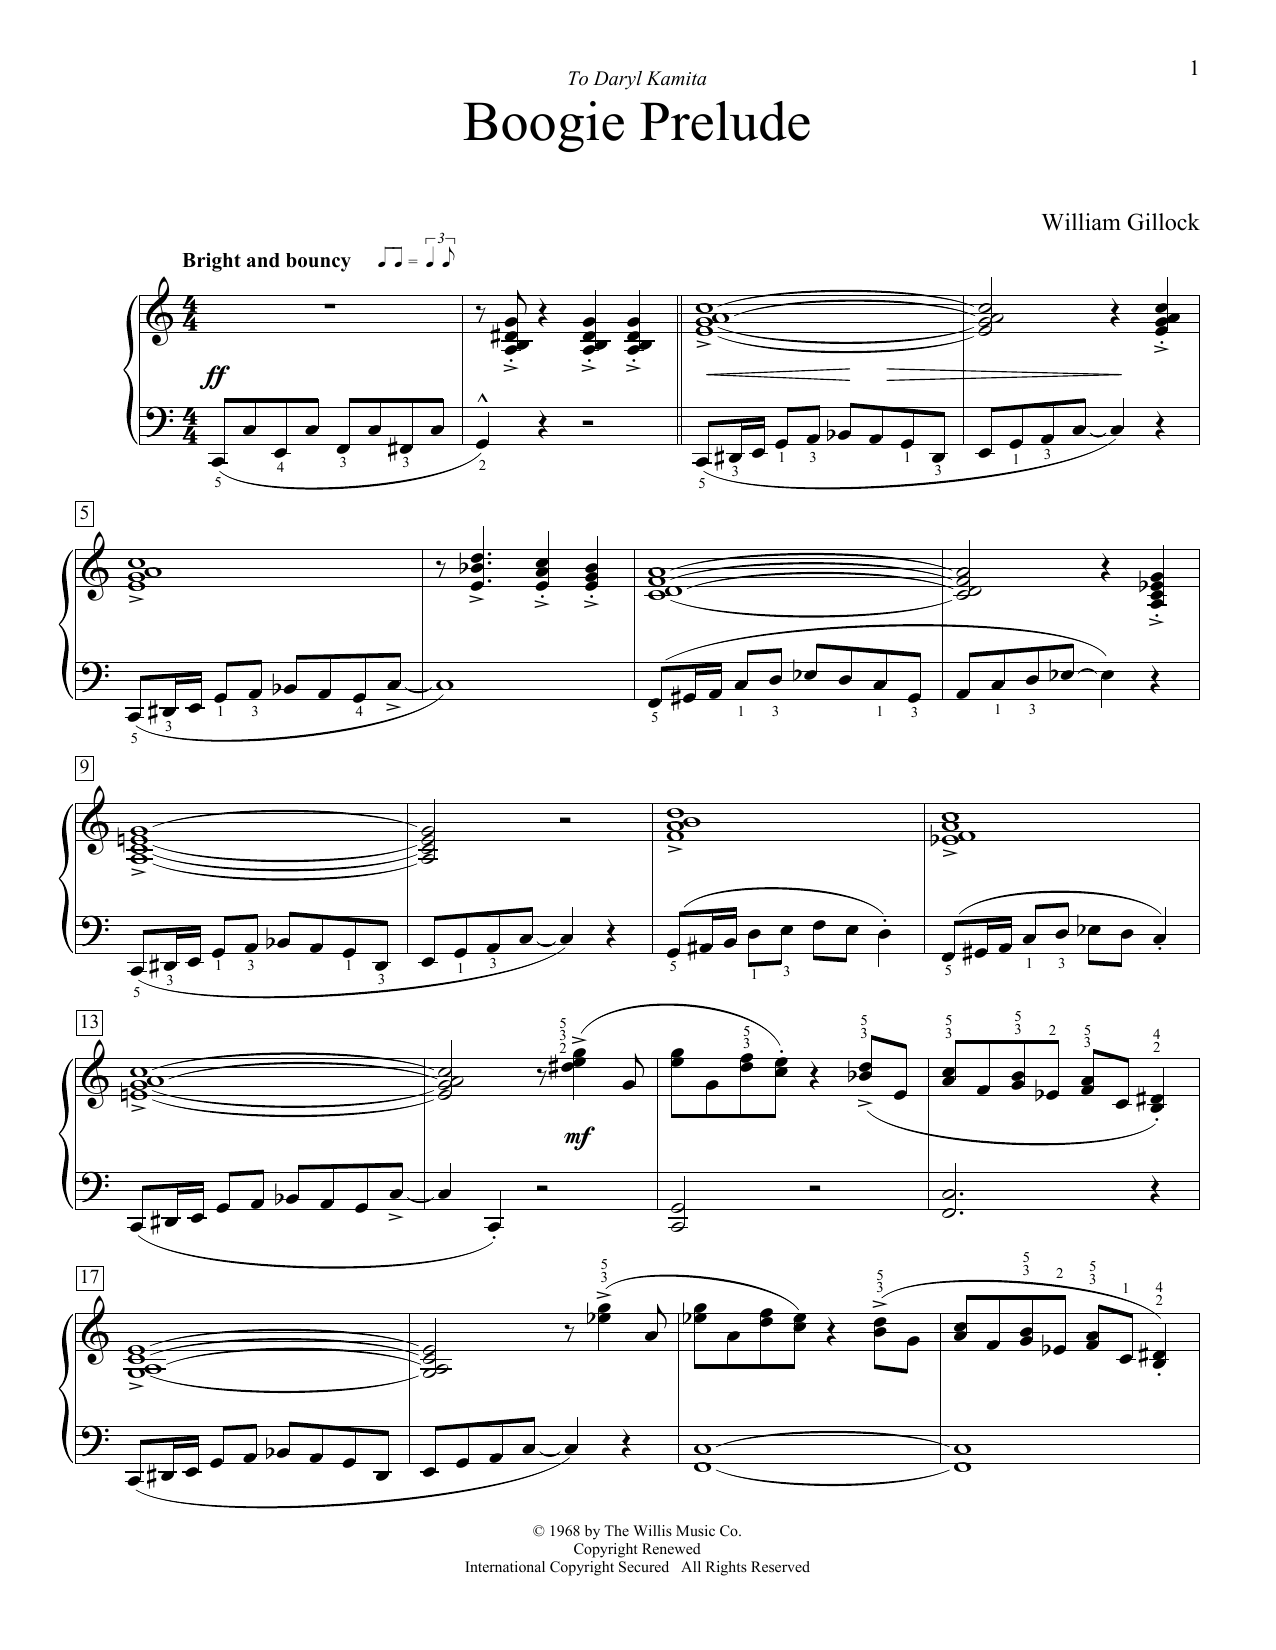 Download William Gillock Boogie Prelude Sheet Music